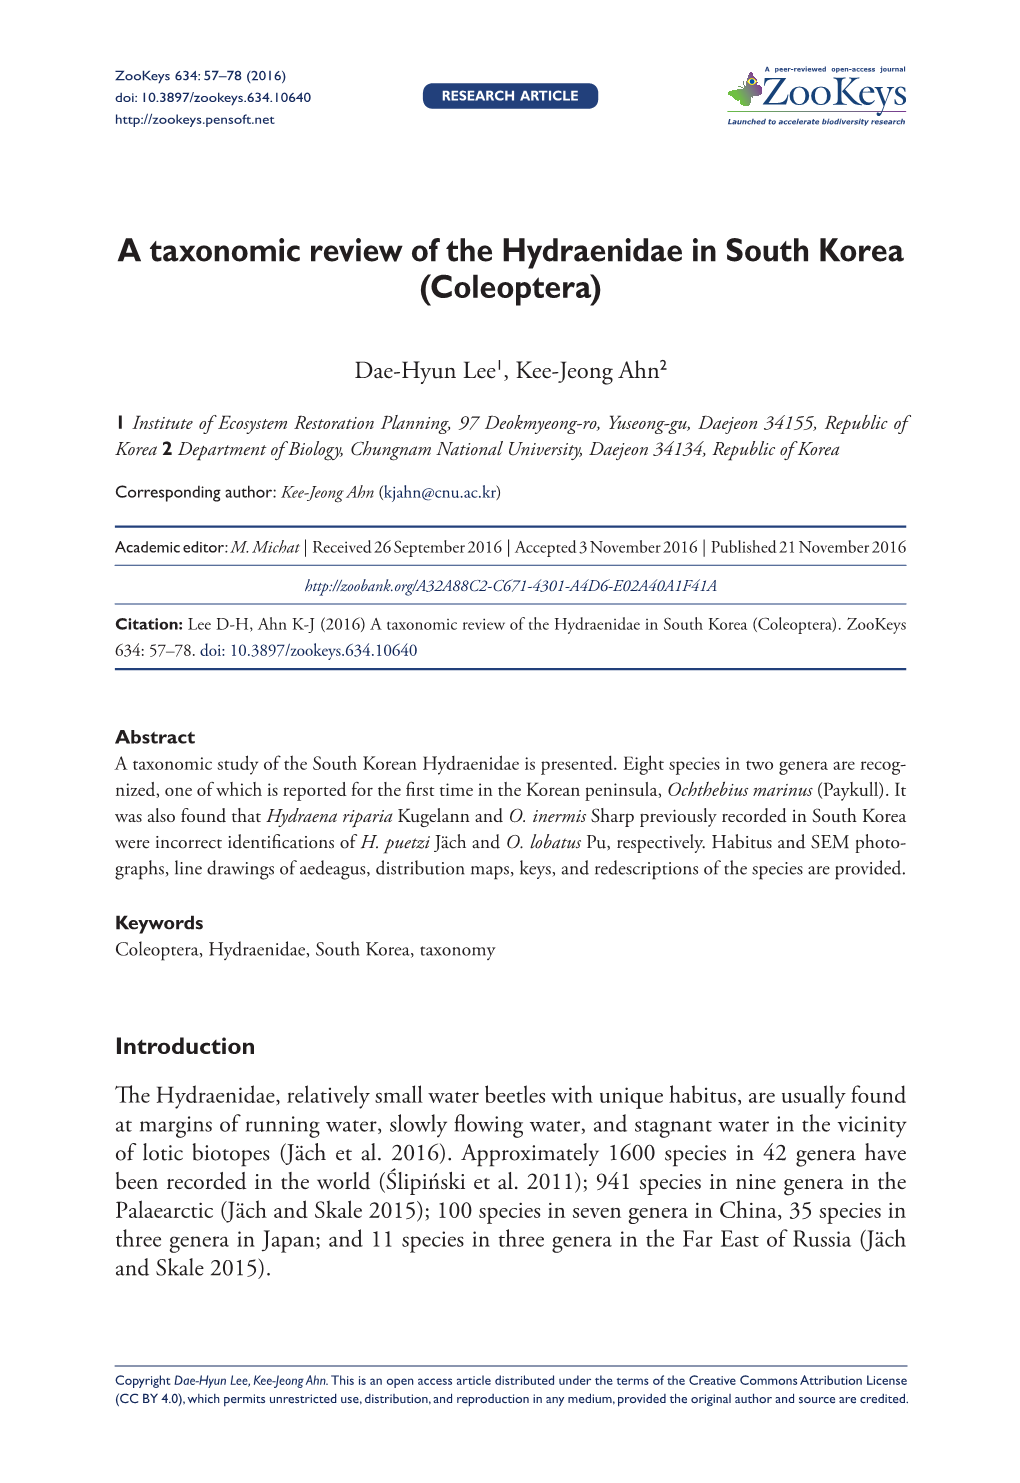 ﻿A Taxonomic Review of the Hydraenidae in South Korea